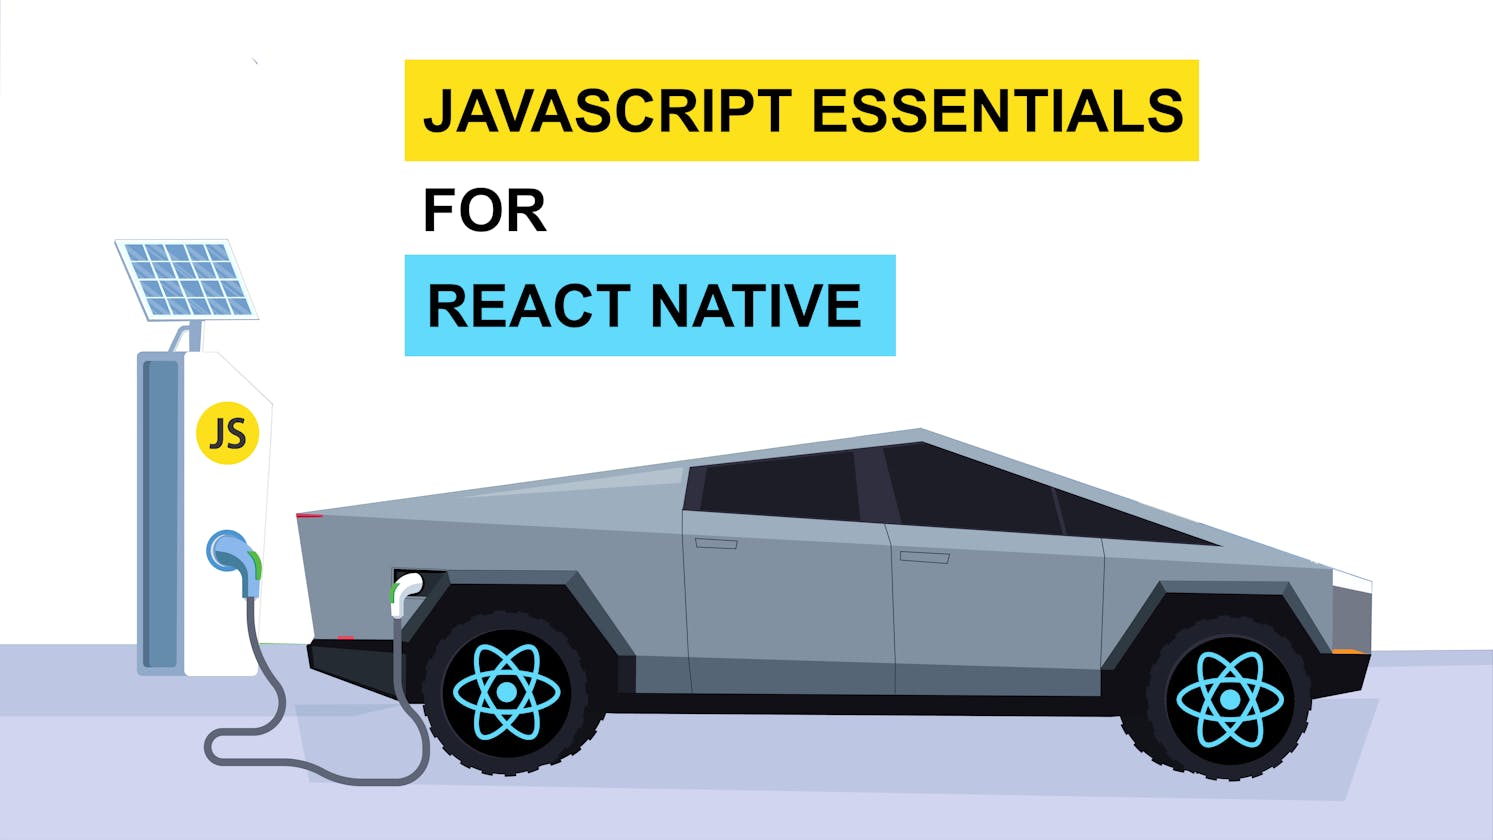 JavaScript Essentials for React Native - SERIES